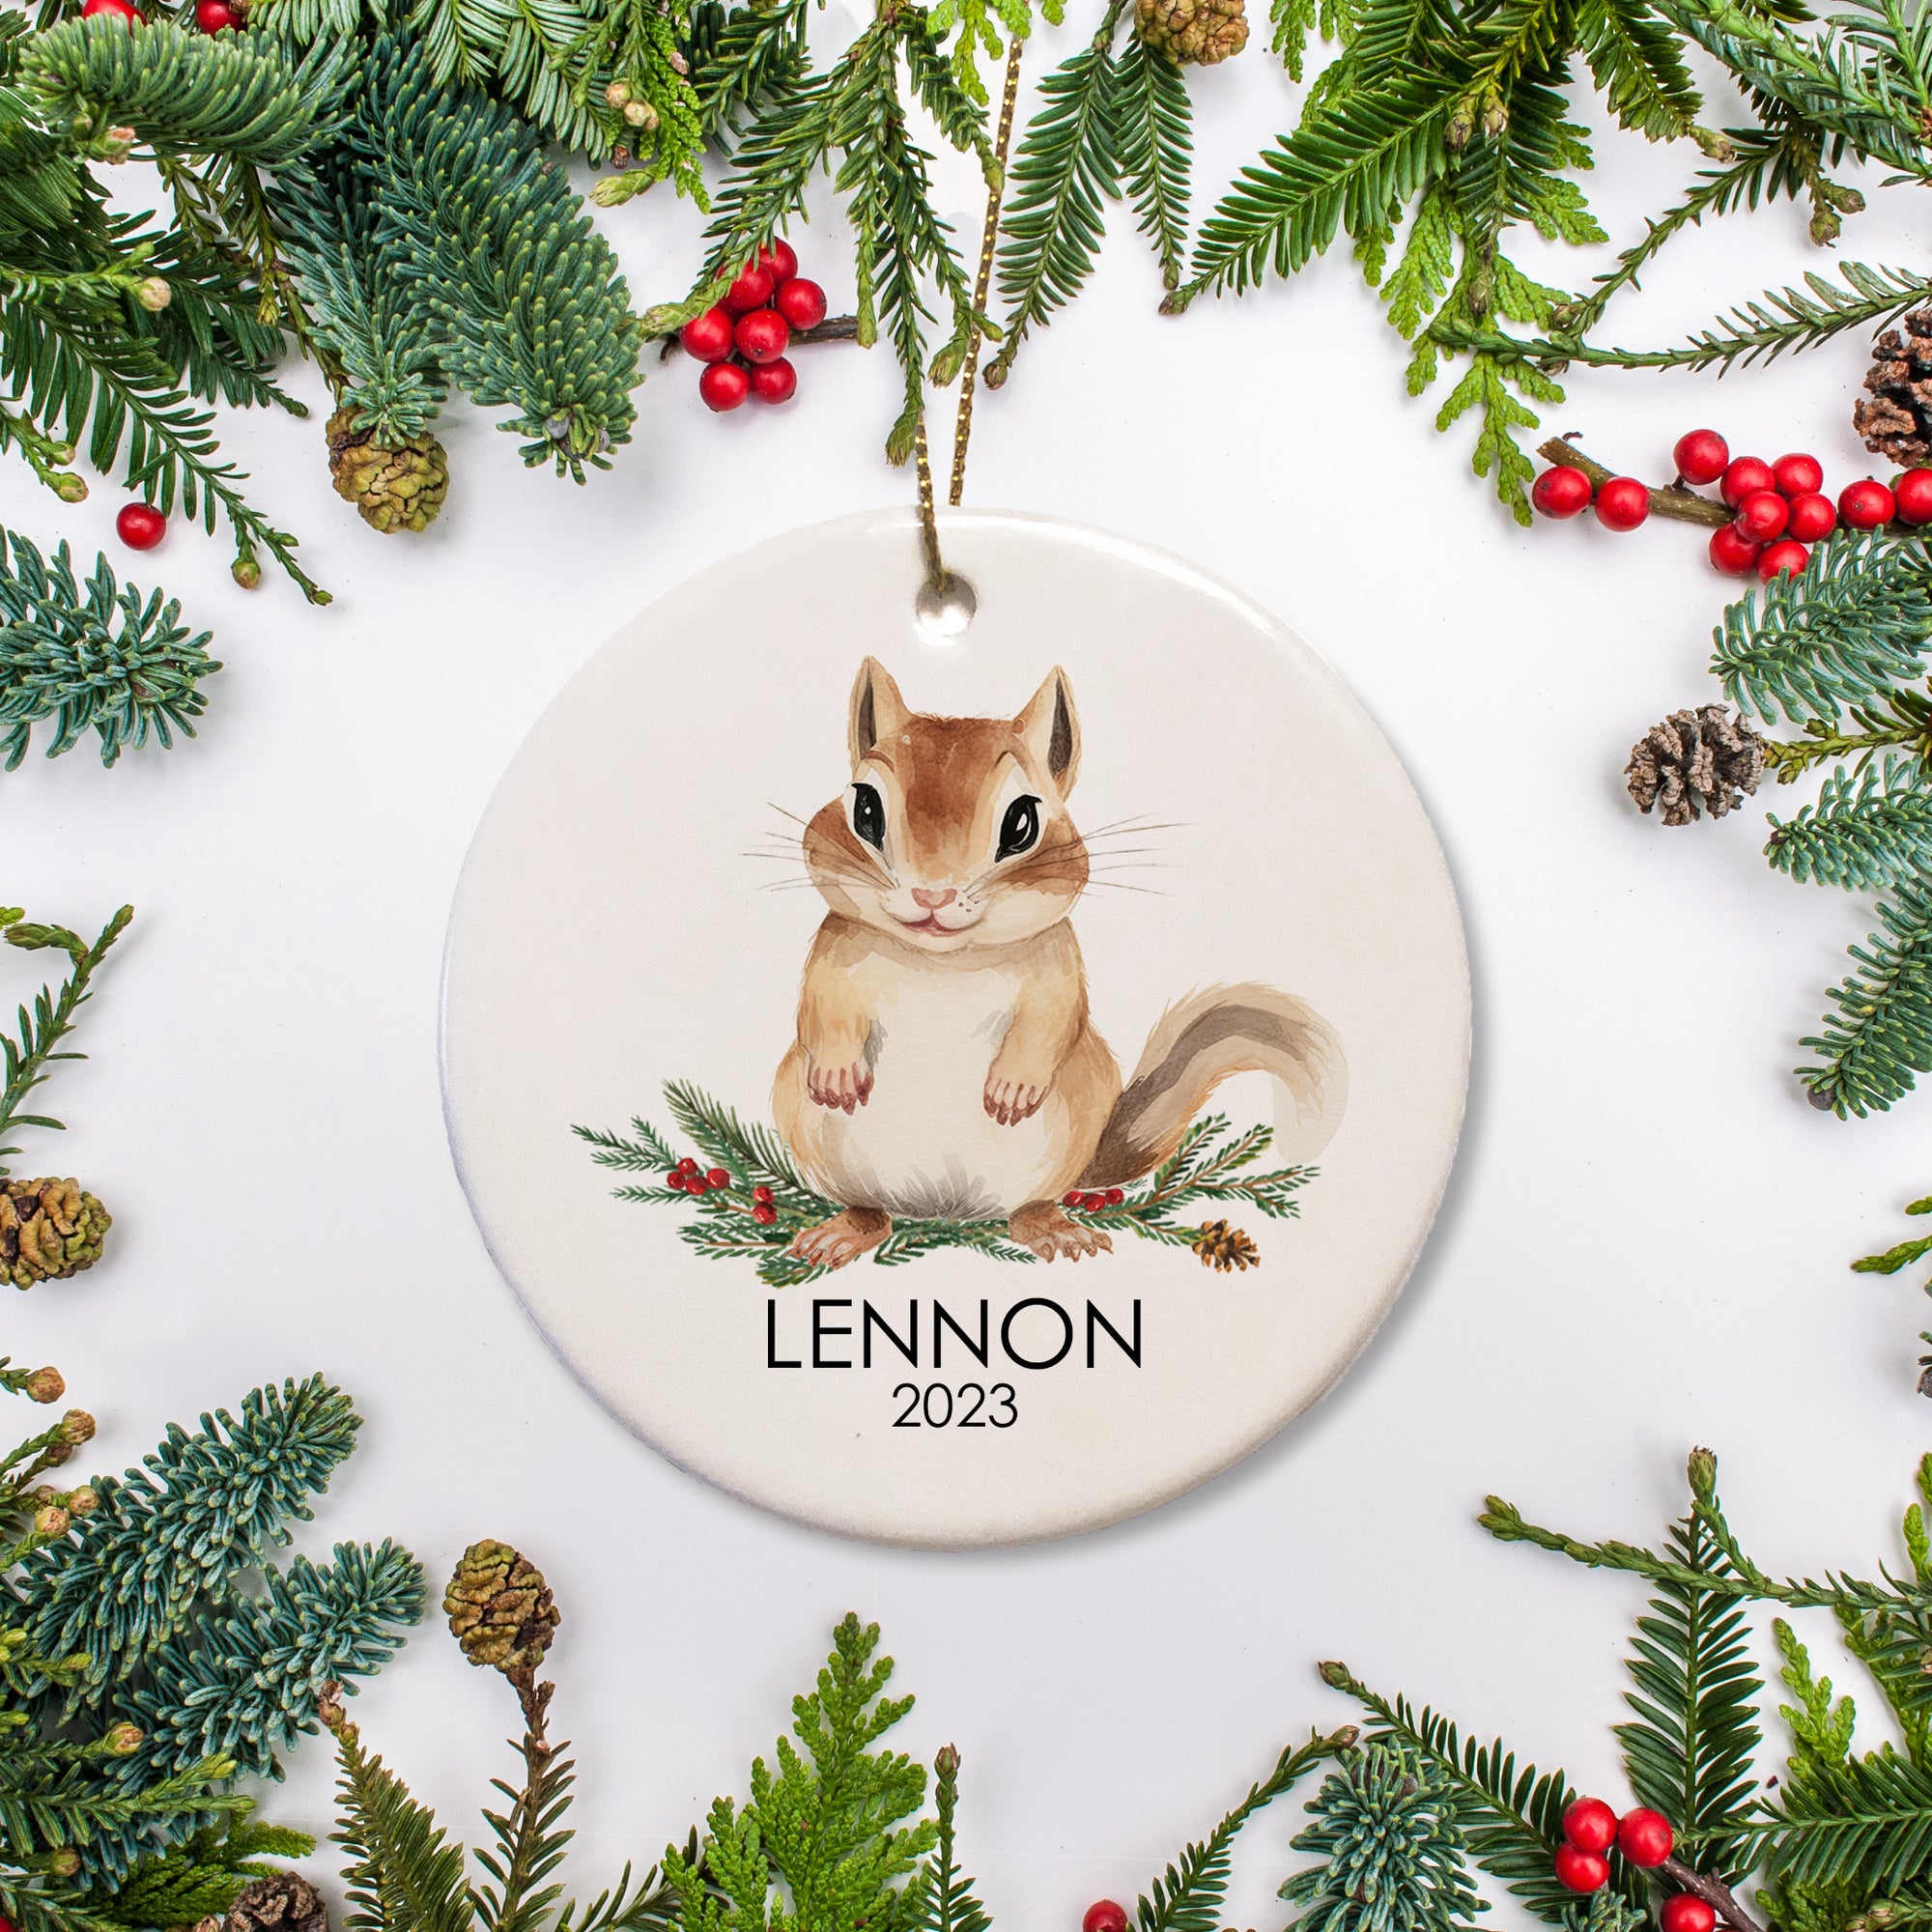 Chipmunk Christmas ornament, personalized with a name and year, ceramic ornament